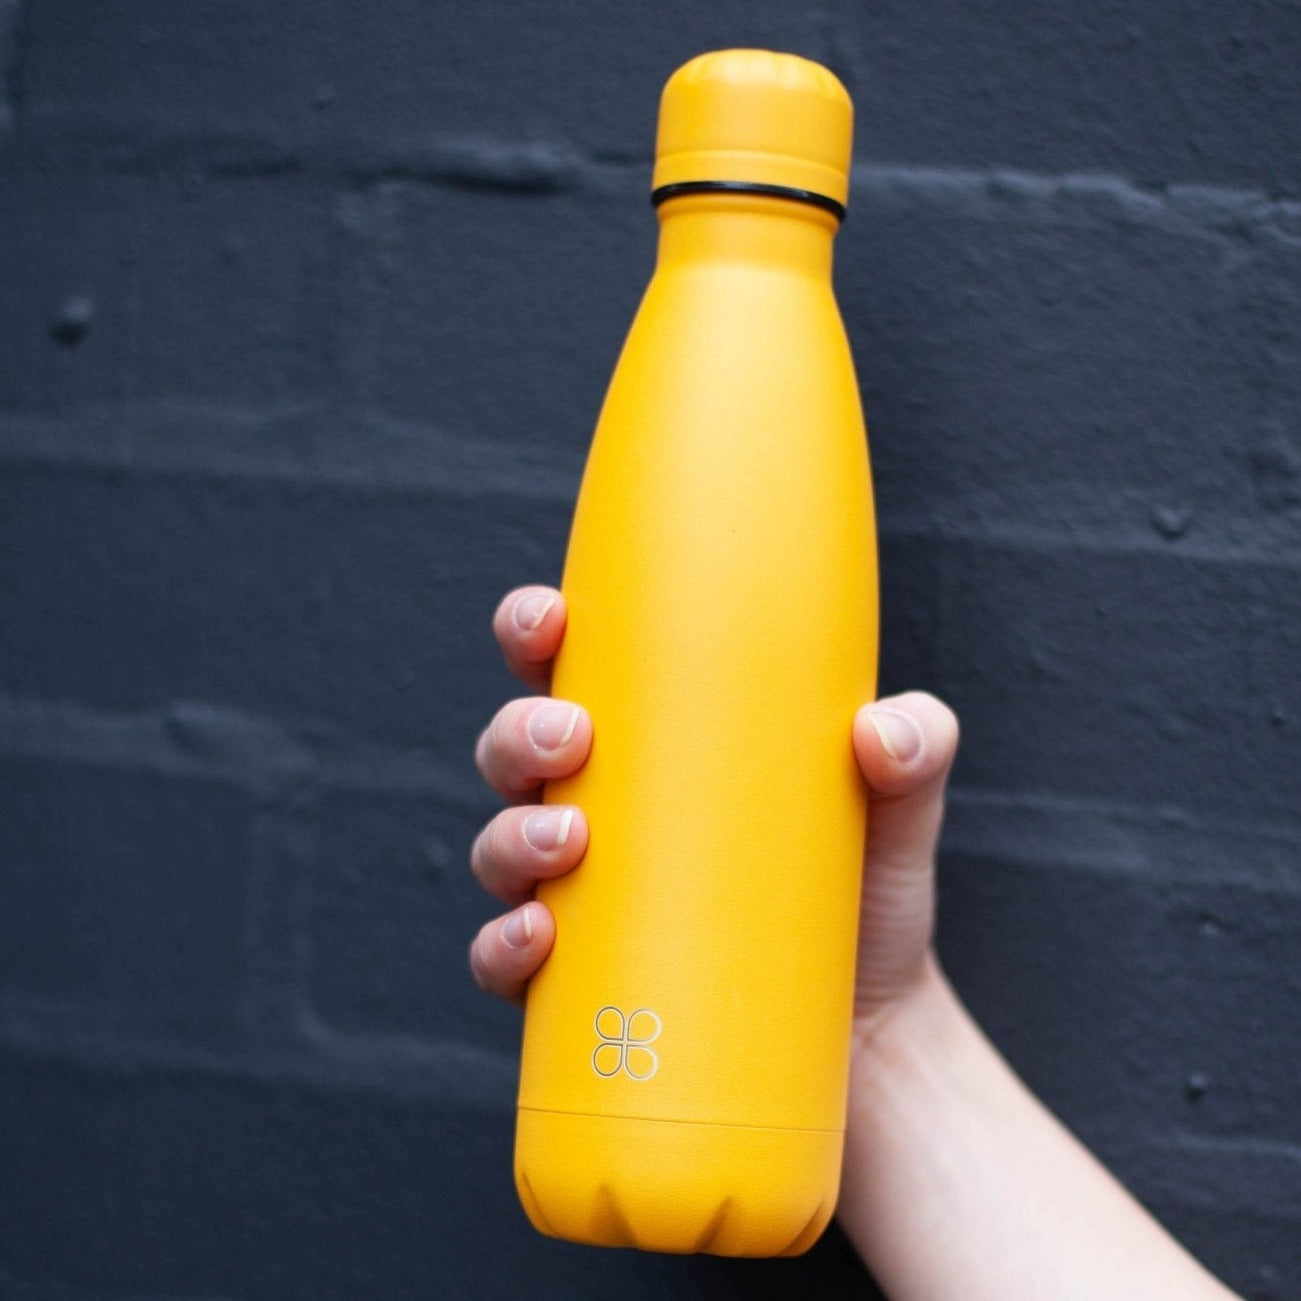 Lady's hand grasping a yellow water bottle